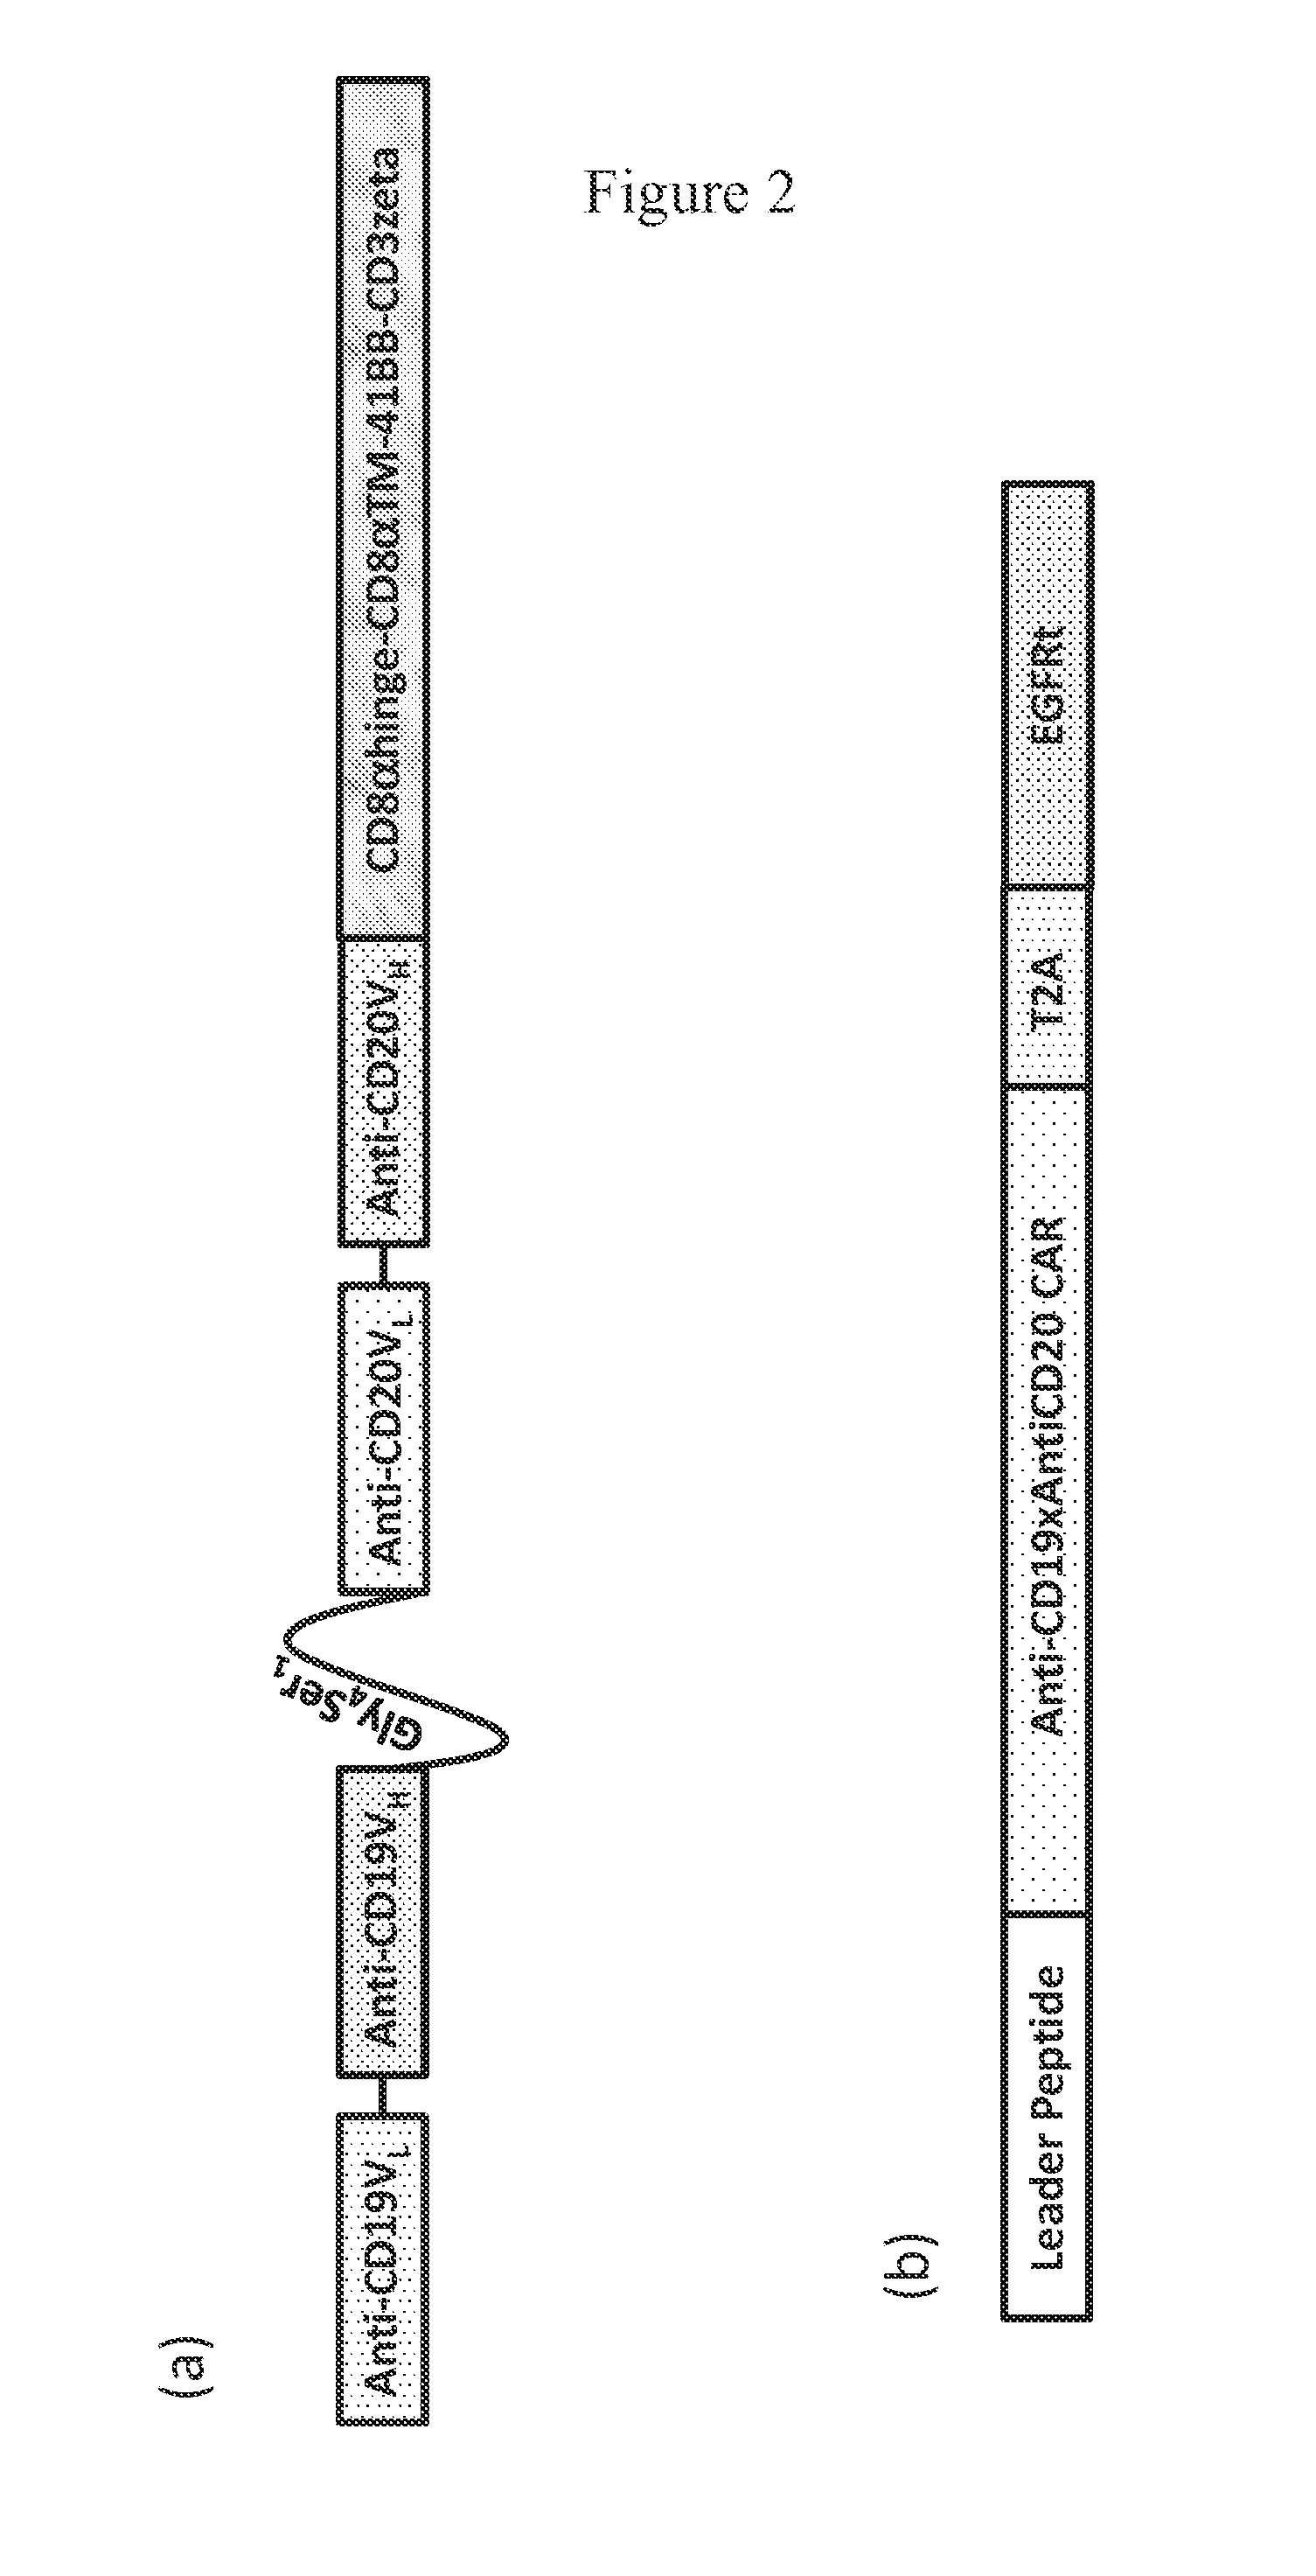 Bispecific chimeric antigen receptors and therapeutic uses thereof